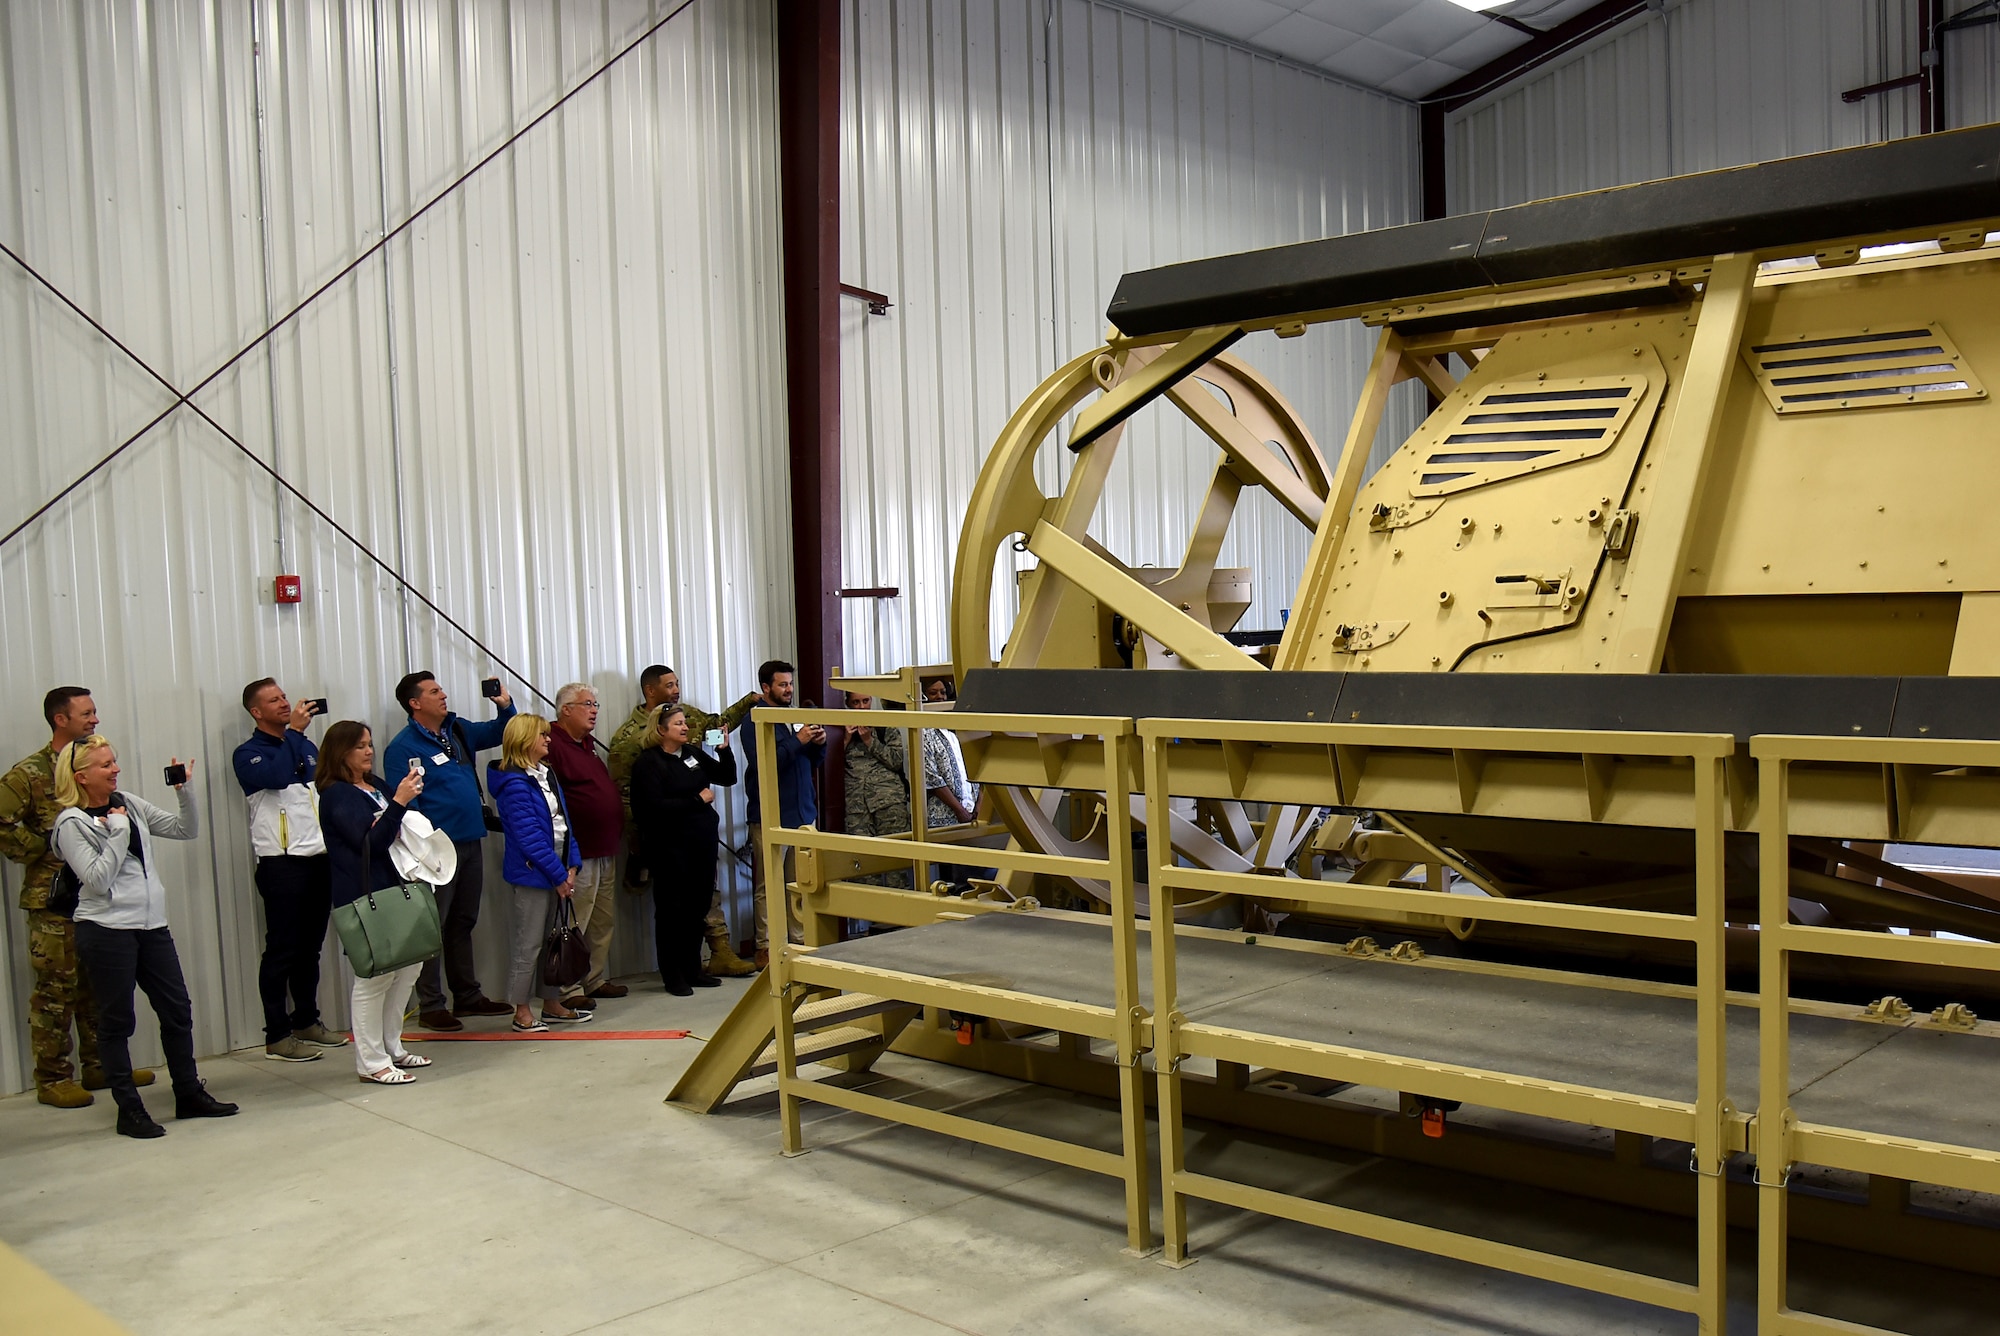 Civic leaders visit the U.S. Air Force Expeditionary Center